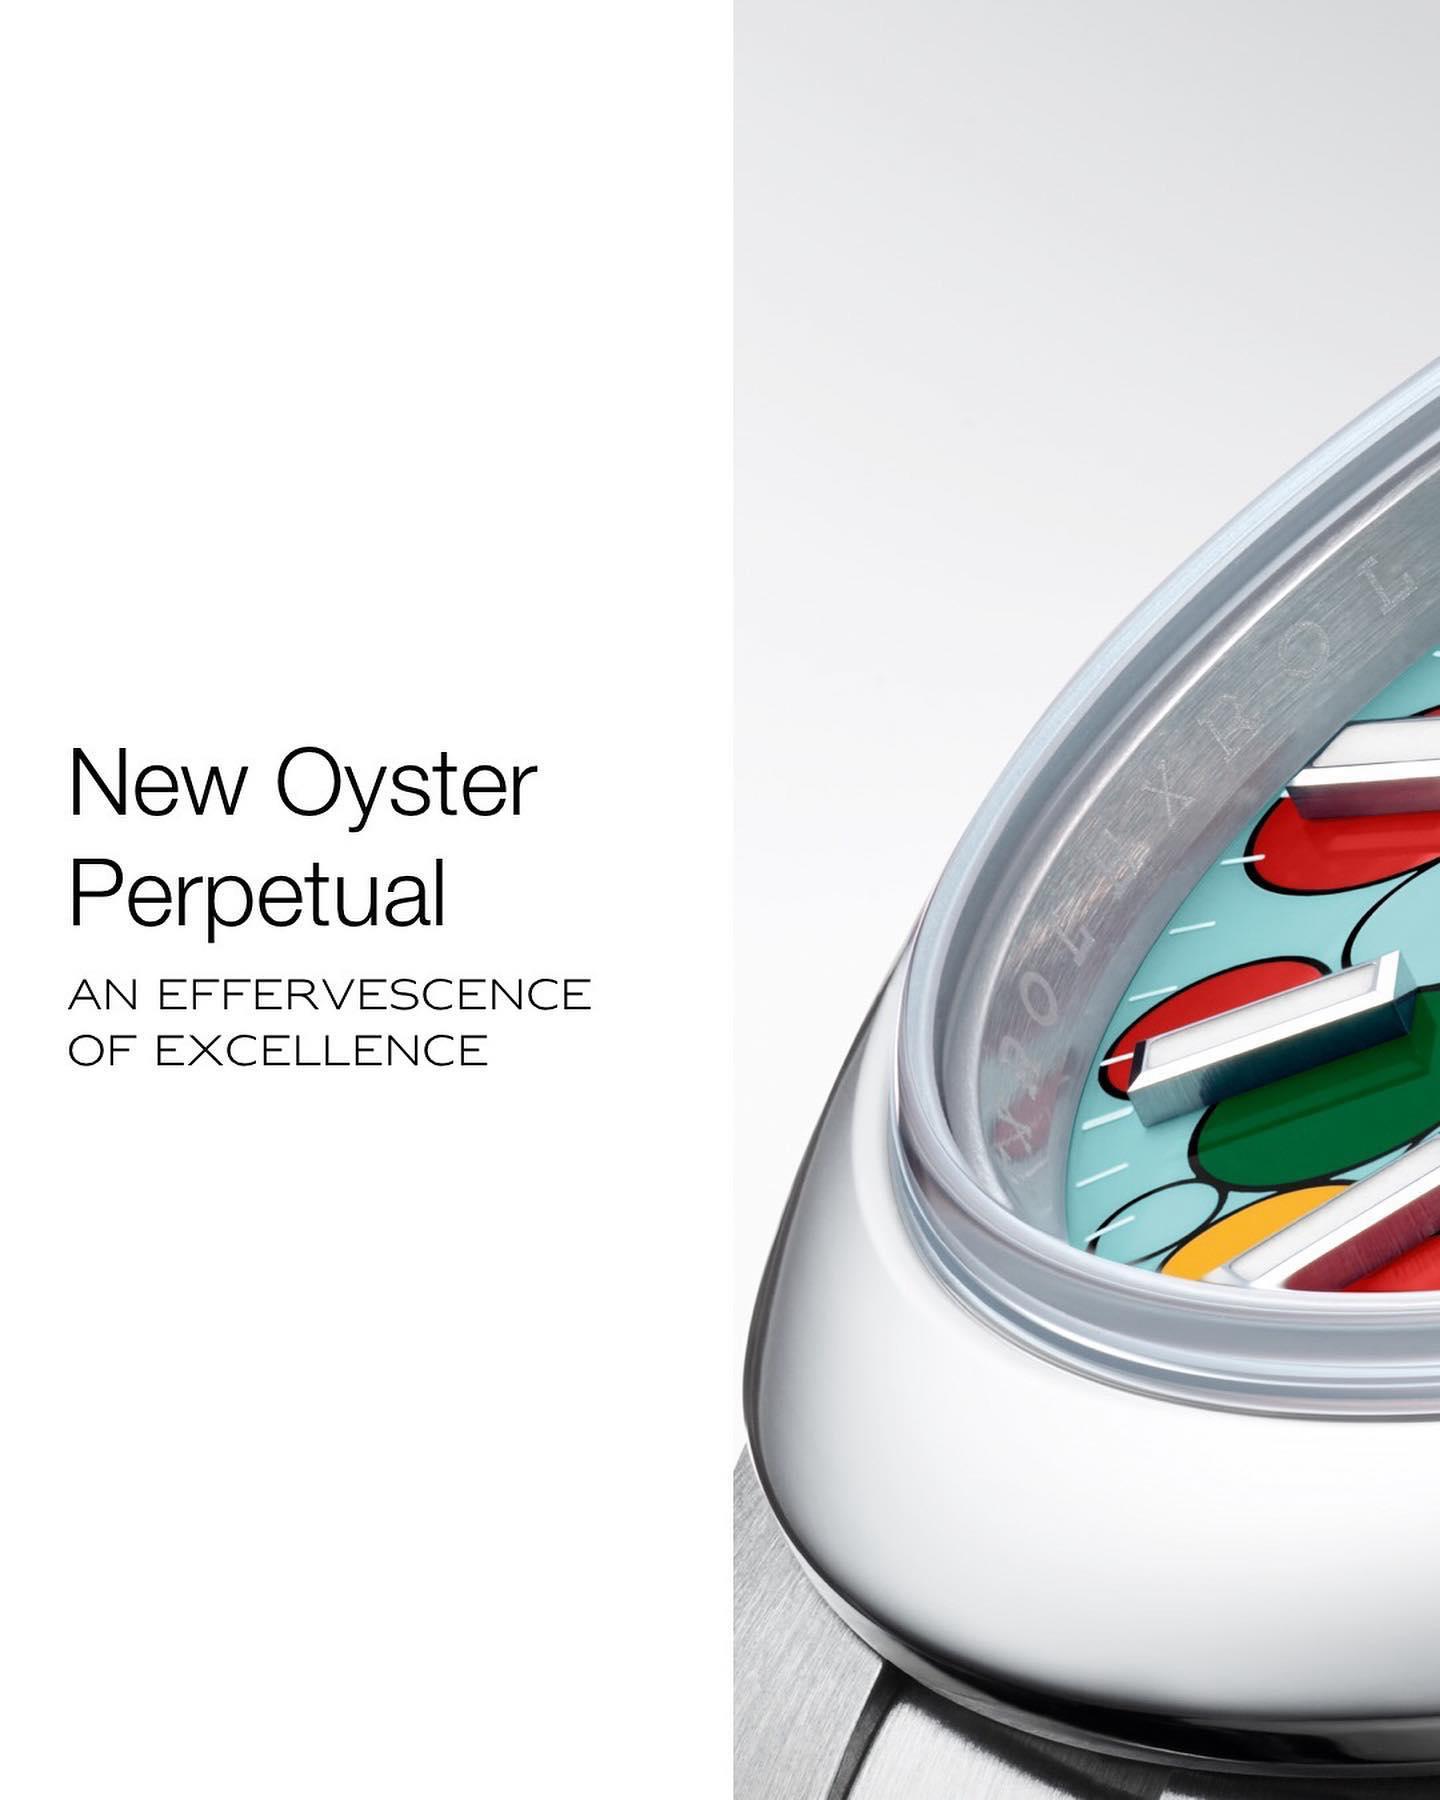 The new dial motif of the Oyster Perpetual is composed of differently sized bubbles fringed with bla